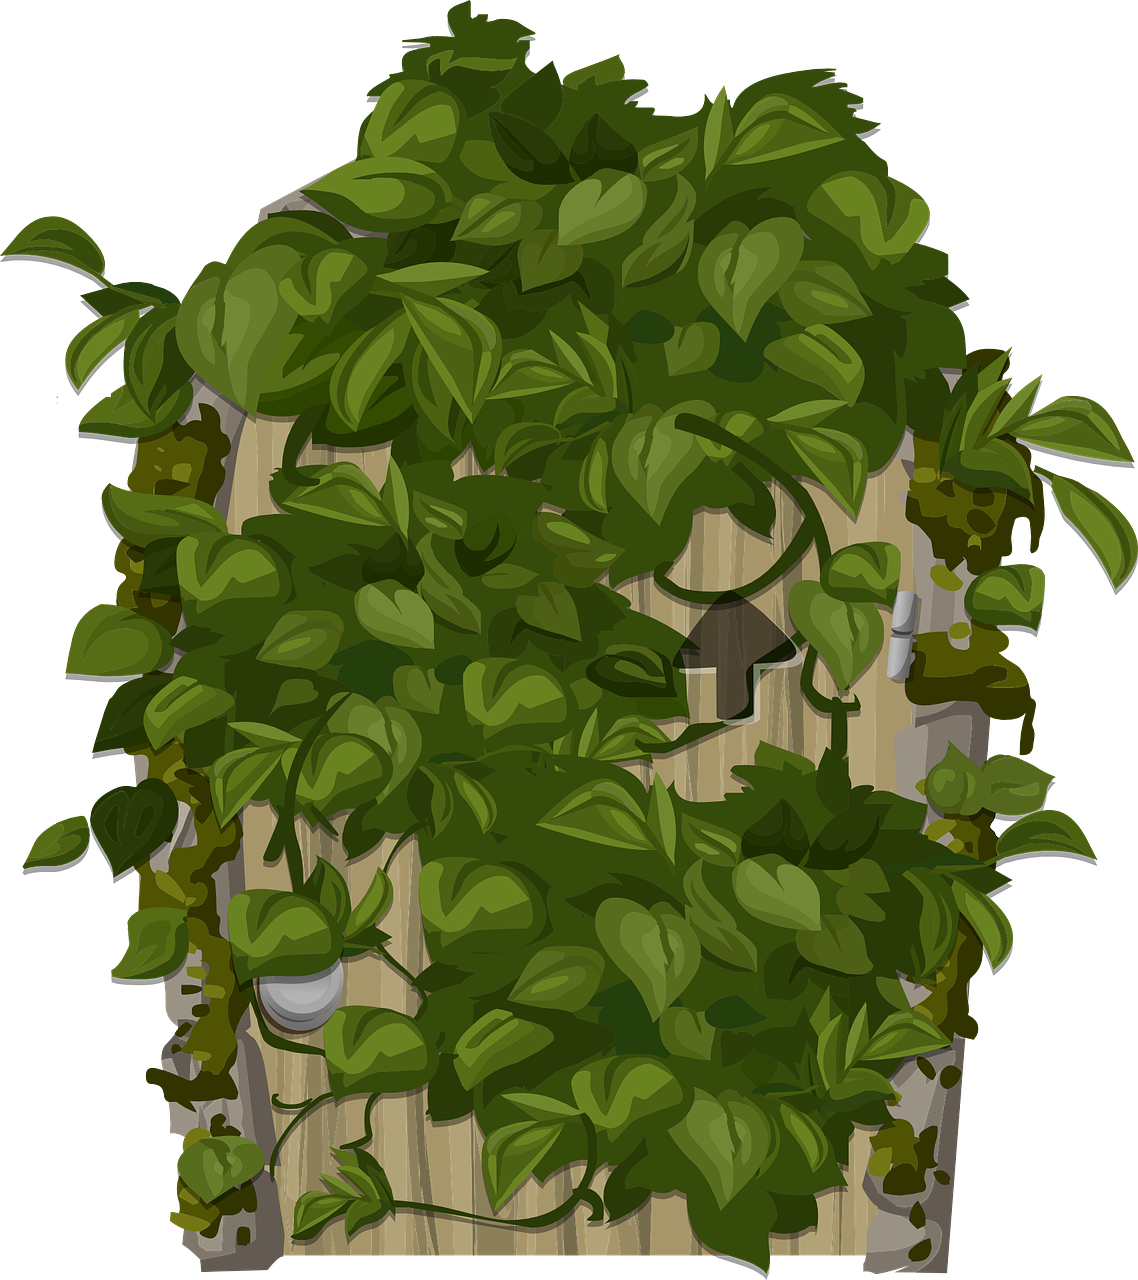 Leafy Camouflage House Vector